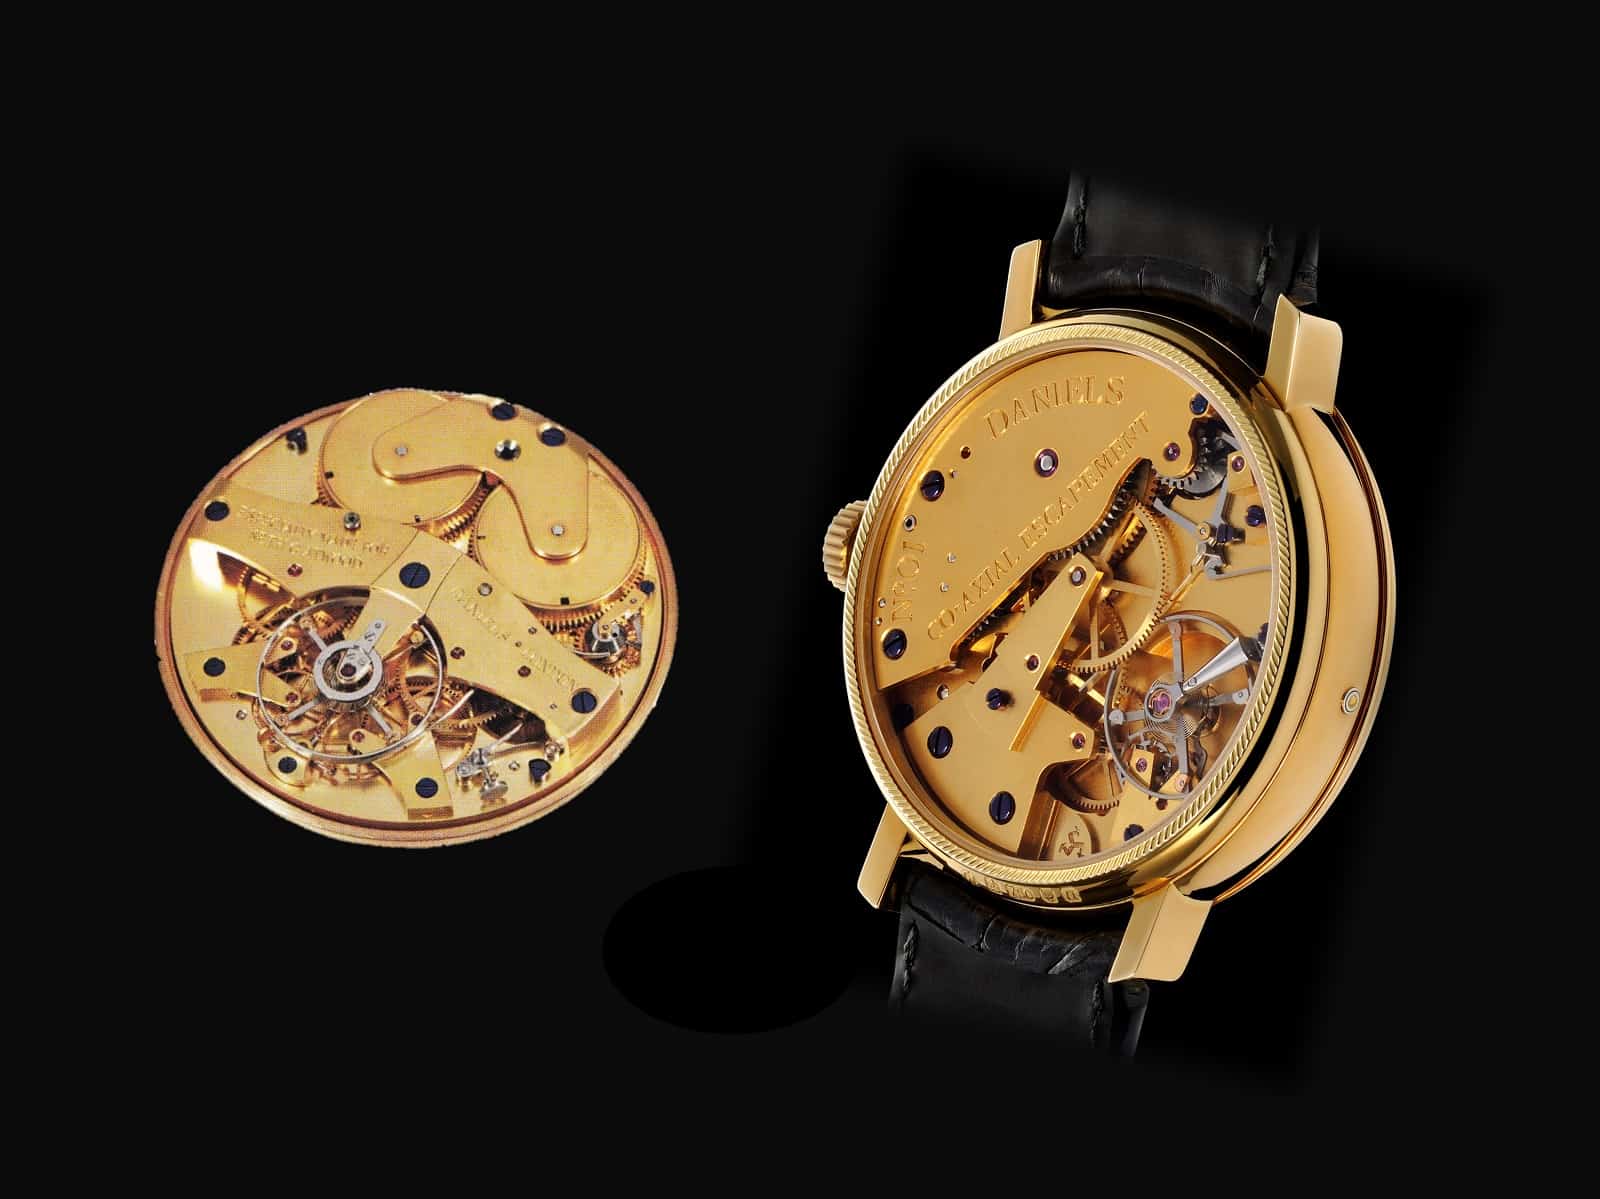 Daniels Co-Axial Hemmung Atwood 1976 und Omega Co-Axial-Hemmung Millenium Edition 1999